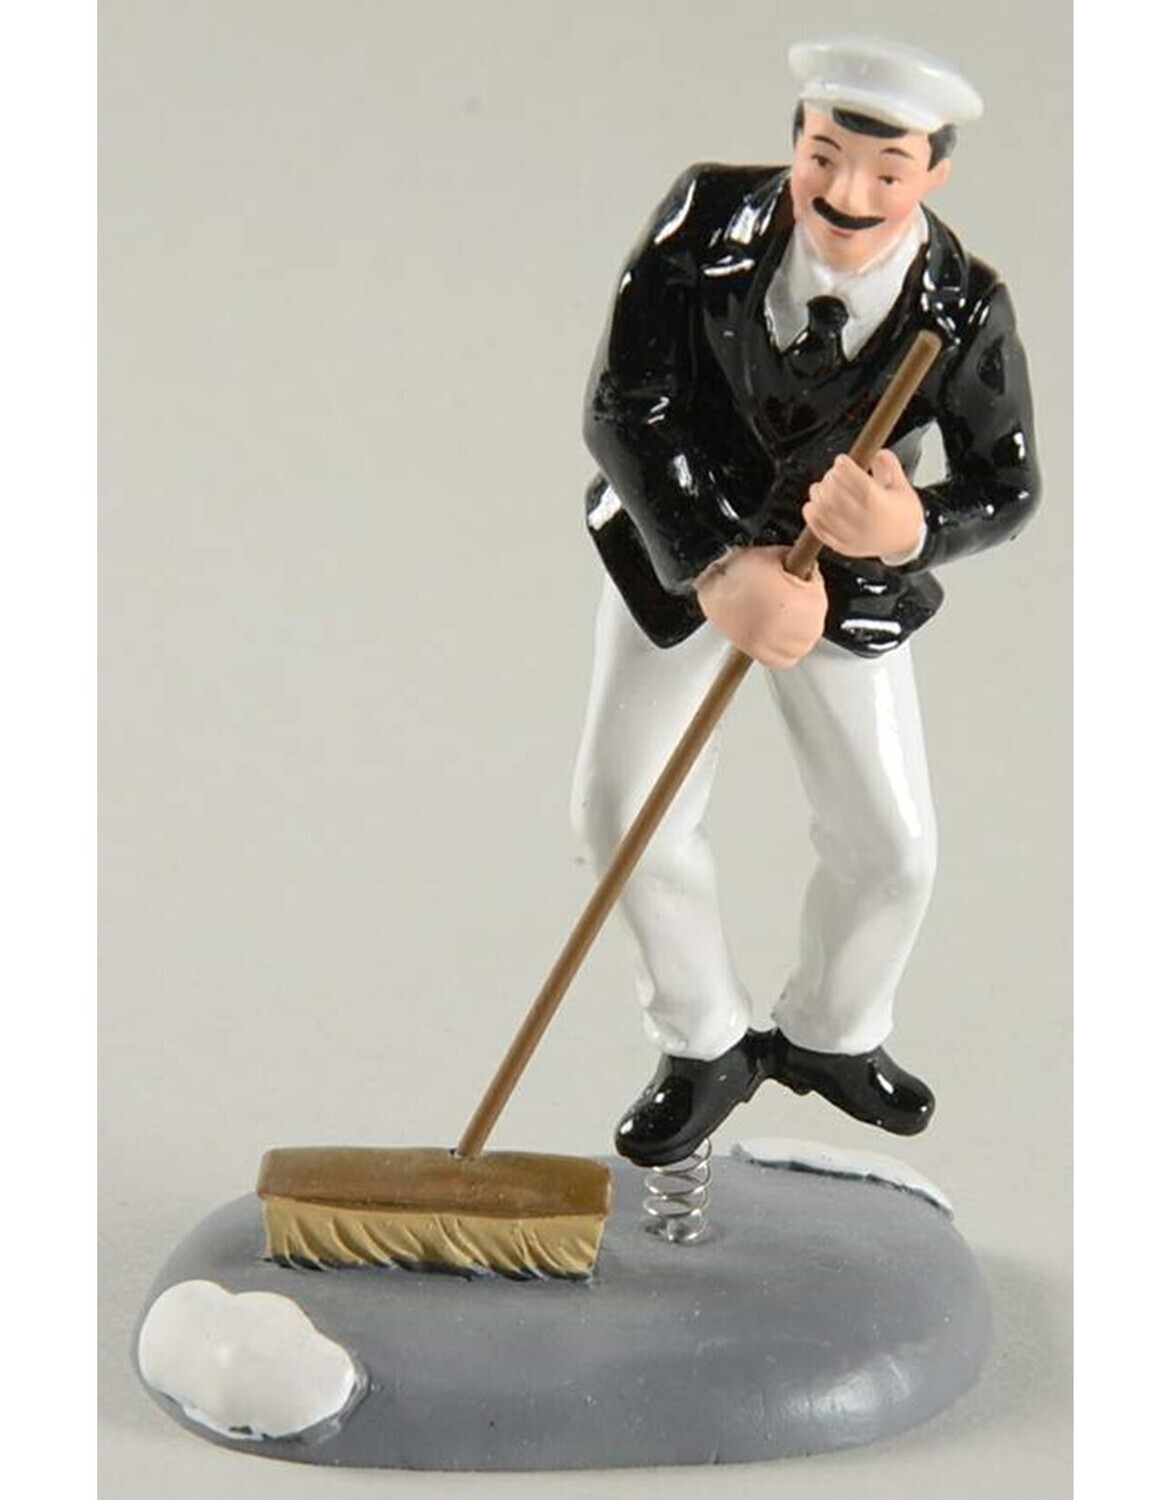 Department 56 Village Accessory "Merry Street Sweeper" (4047549)